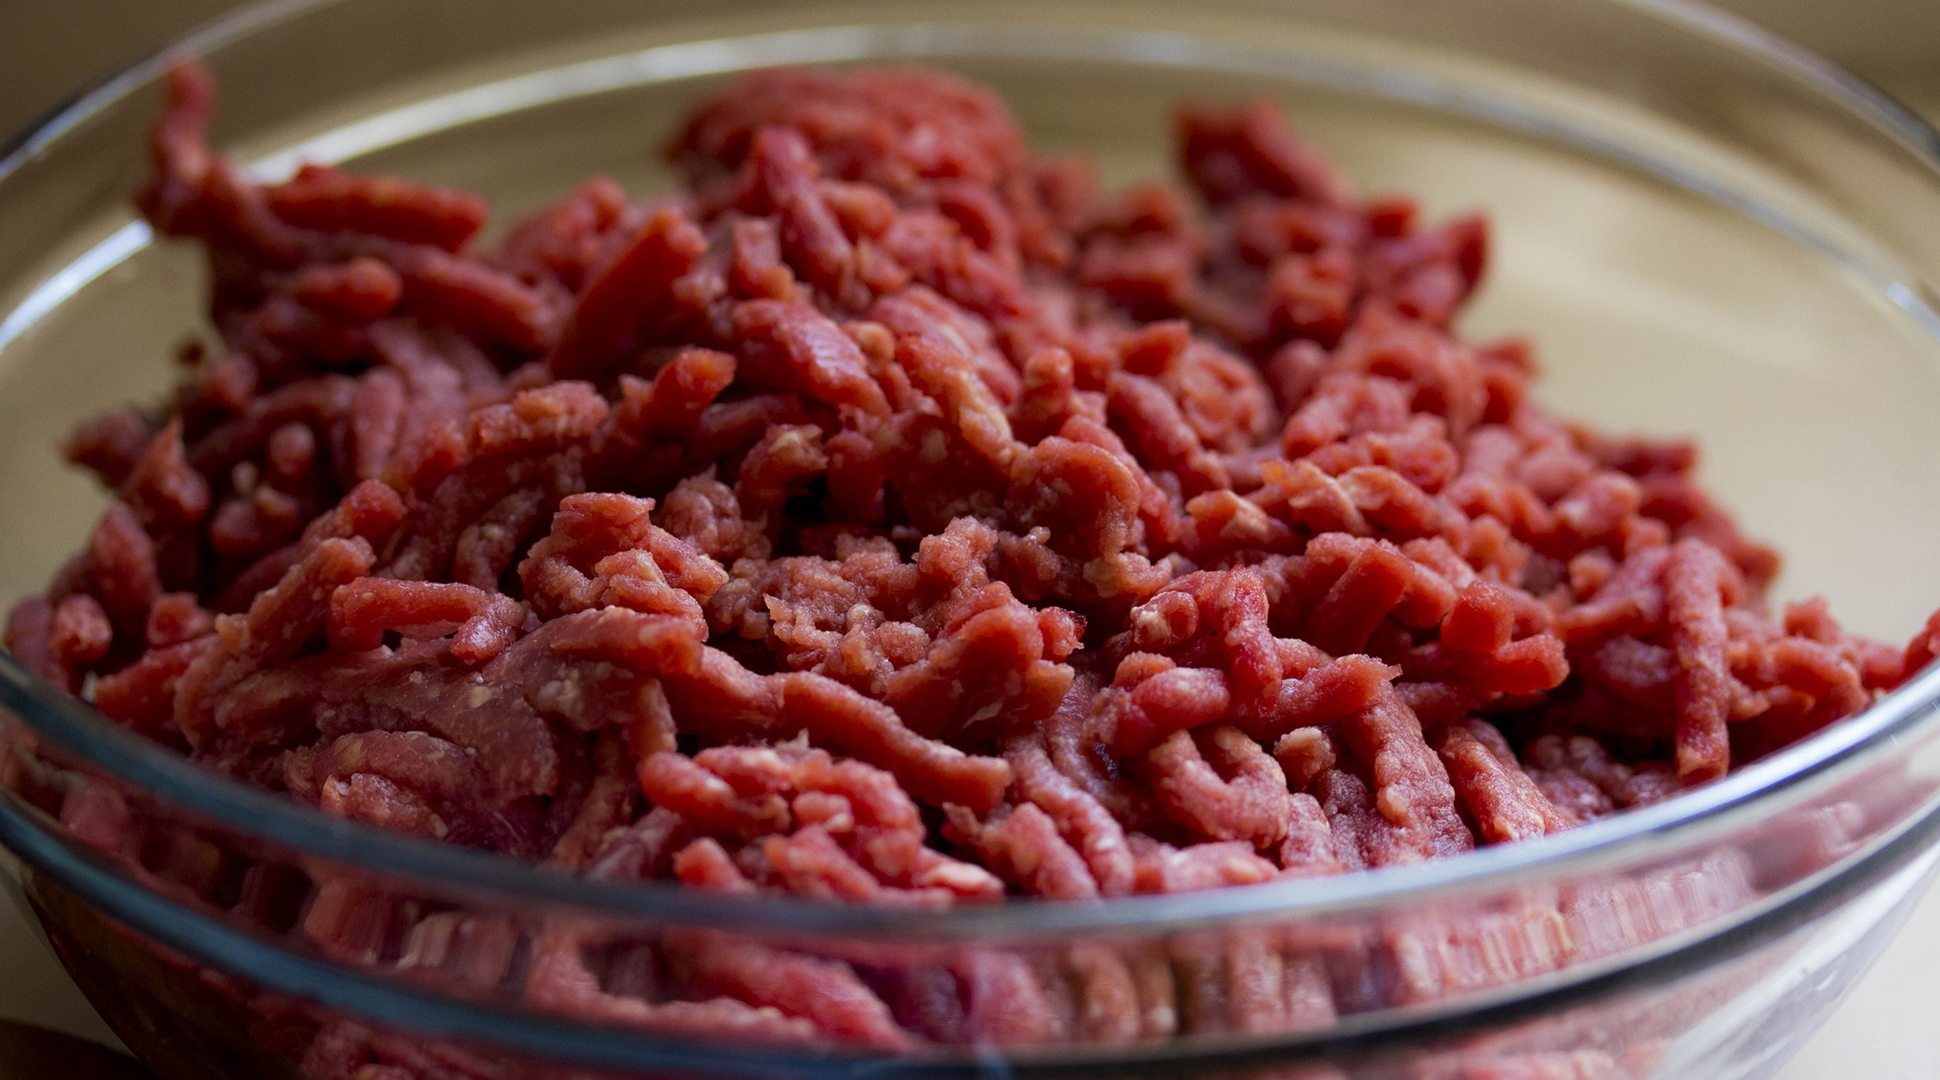 Facts about ground beef